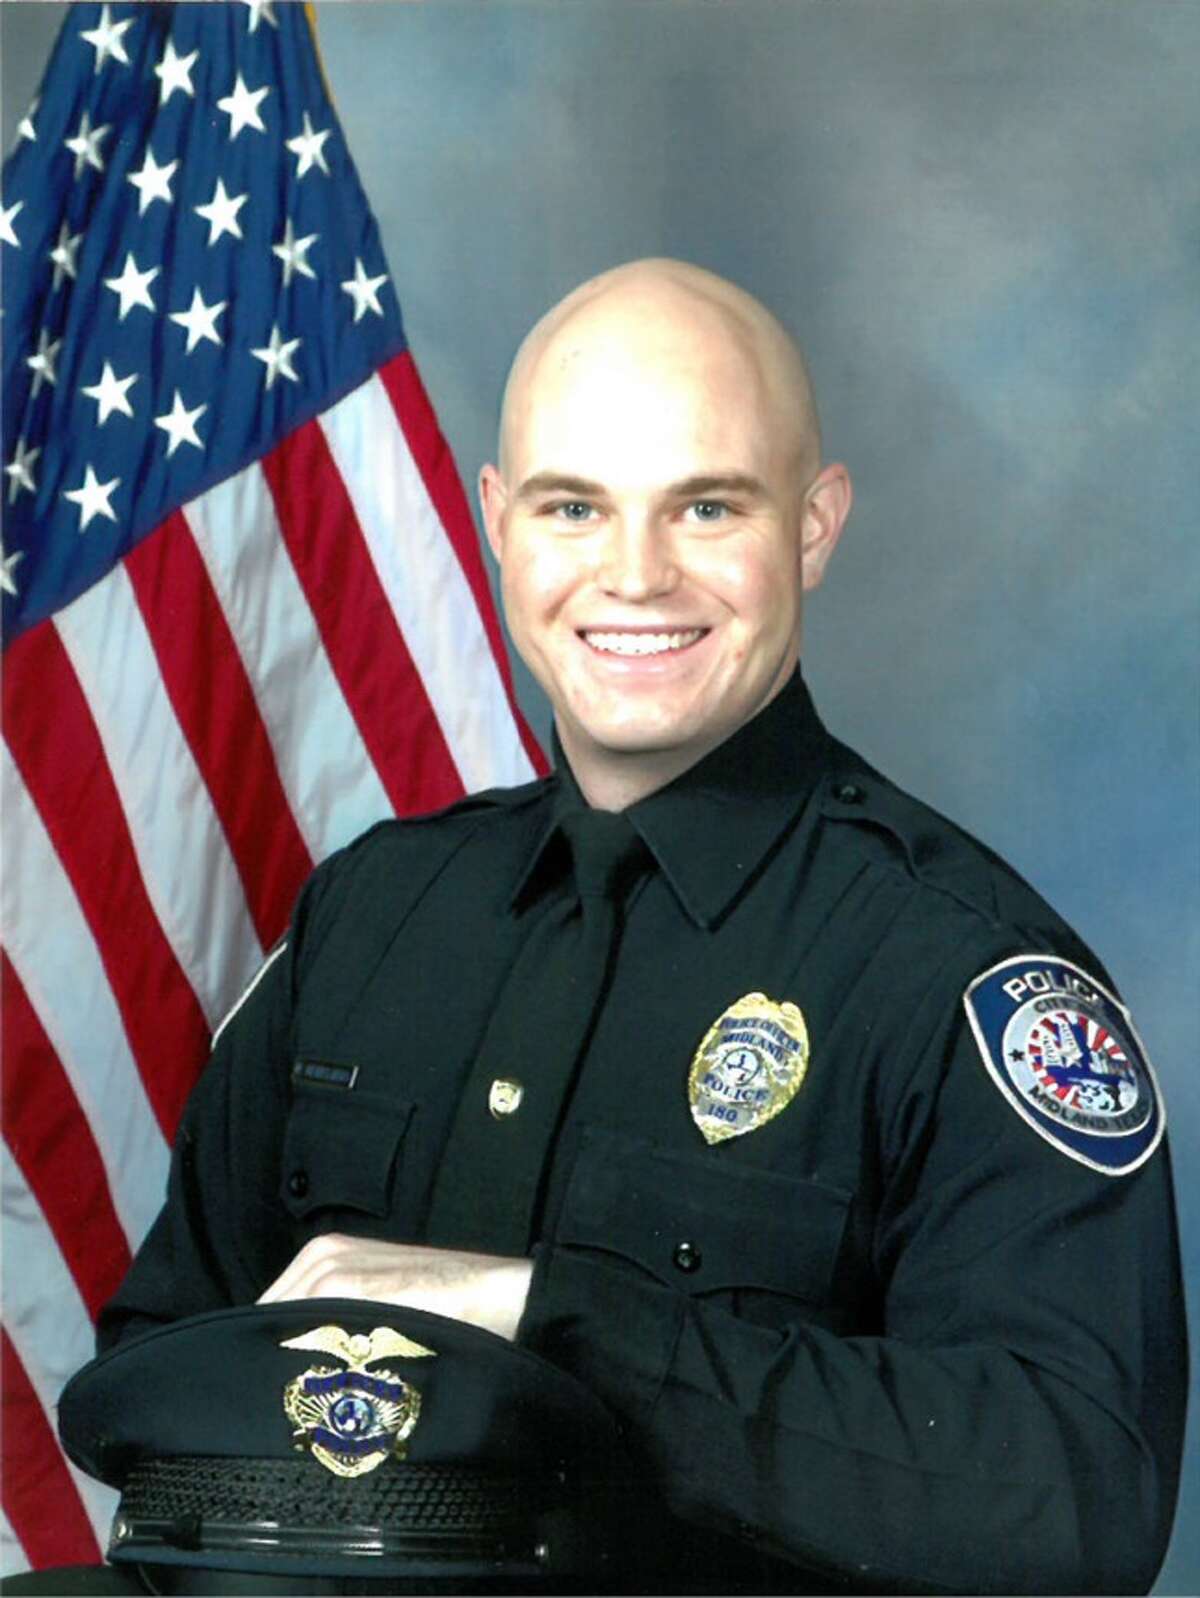 Midland Police Department Officer Nathan Heidelberg died this after being shot while responding to an alarm at a local residence, according to the city’s spokesman.